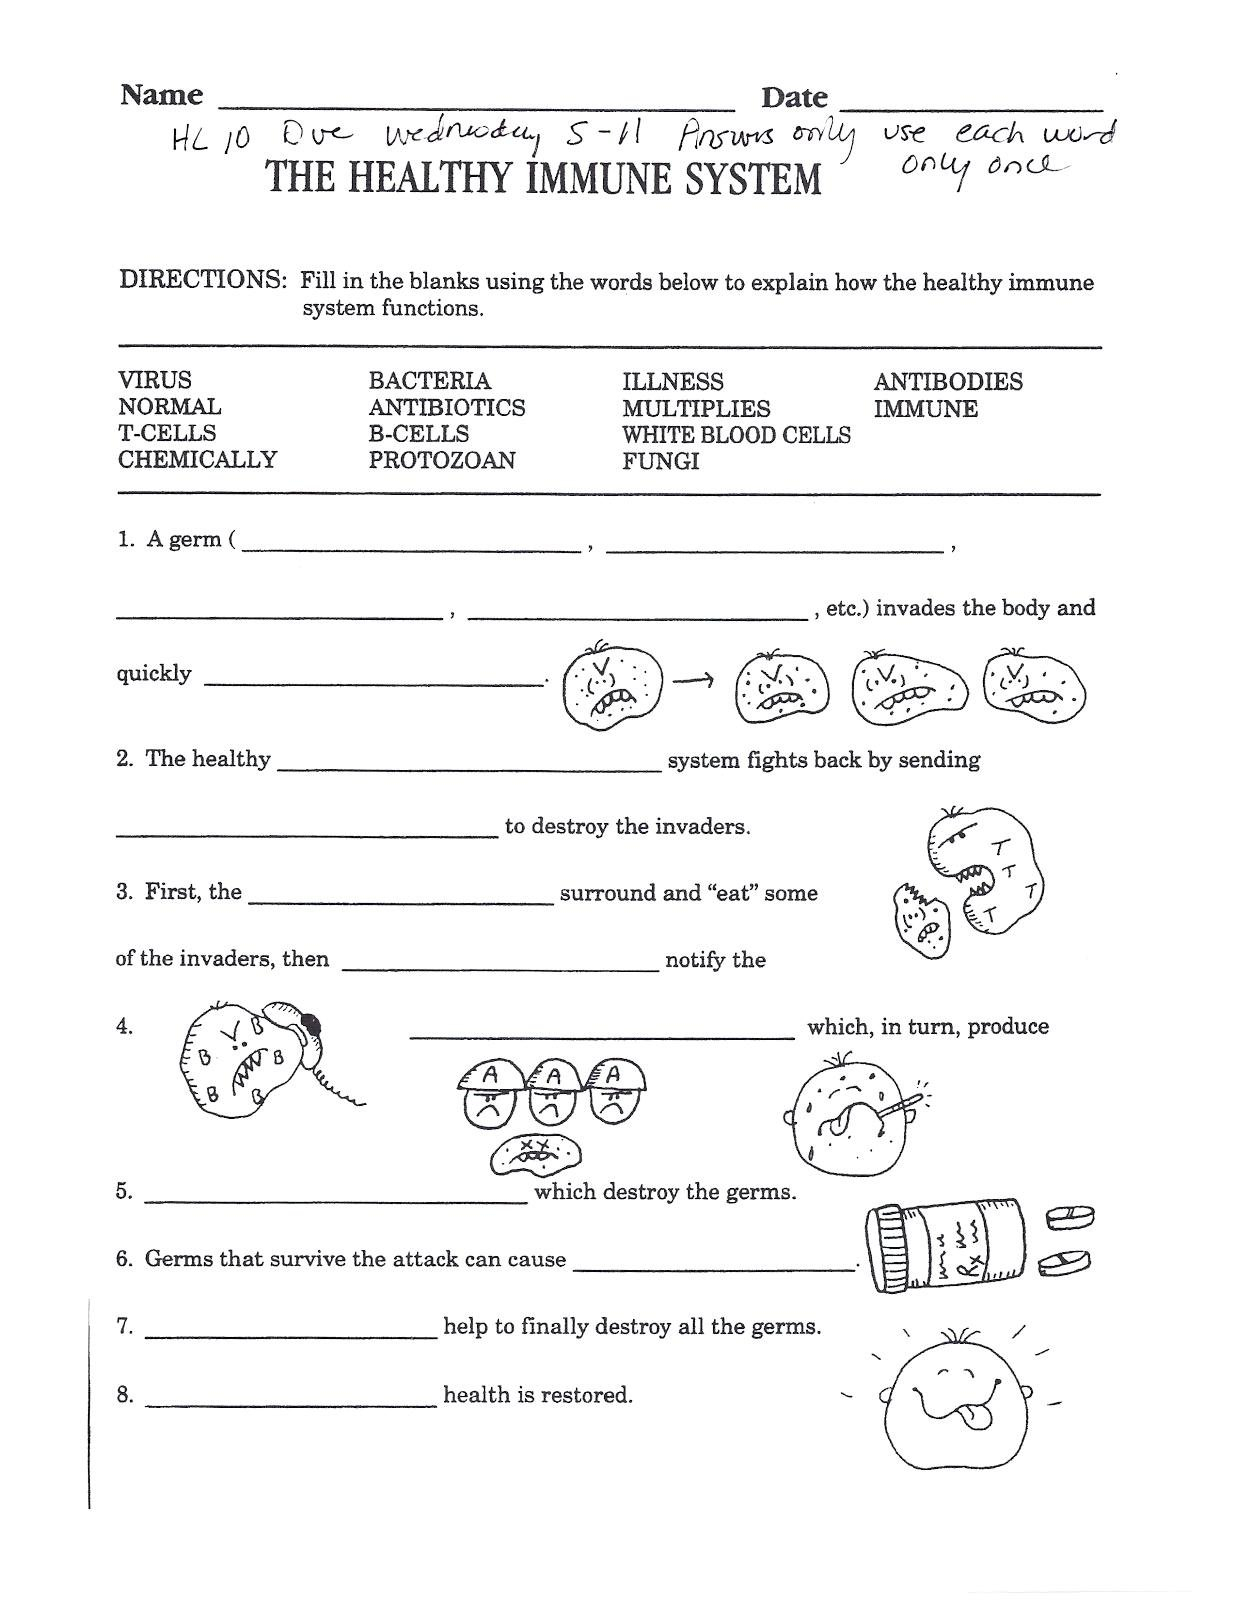 Free High School Health Worksheets Printables  Learning Sample For Along With Middle School Health Worksheets Pdf